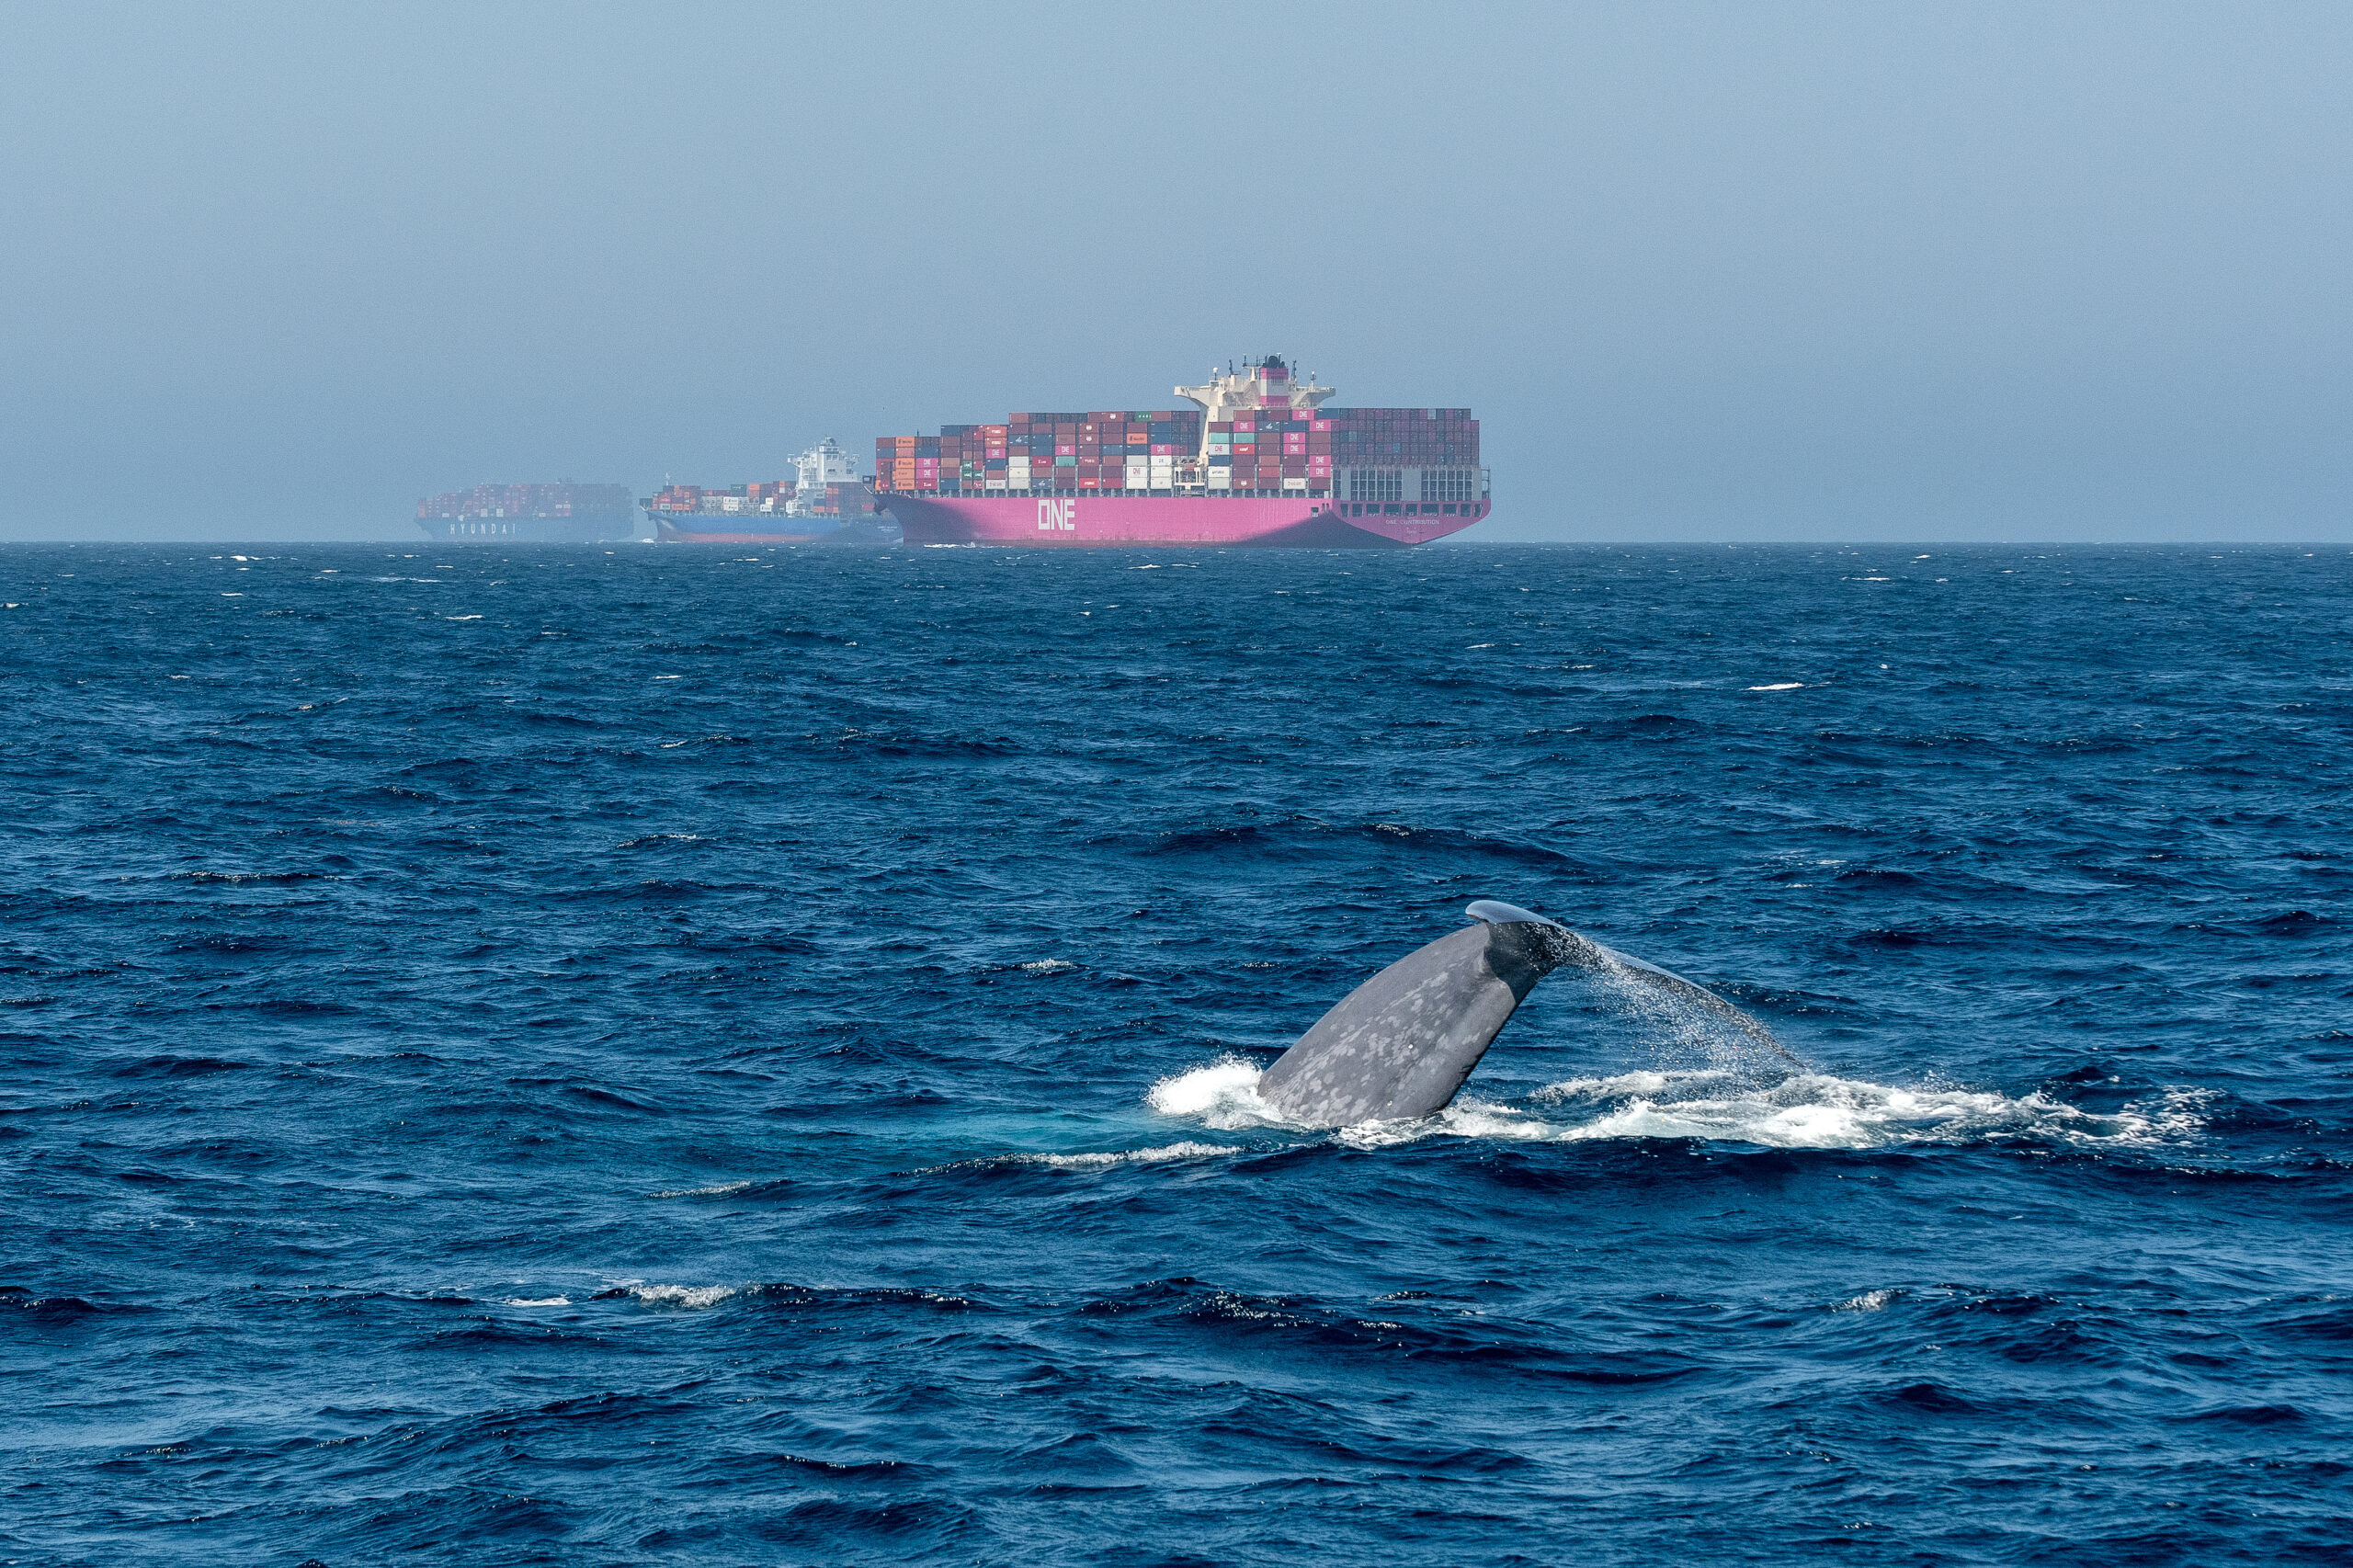 A blue whale breaches in the busy Santa Barbara shipping channel off the Southern California coast. Officials with NOAA are trying to find ways to avoid boat-whale collisions that injure and kill the giant blue whales.